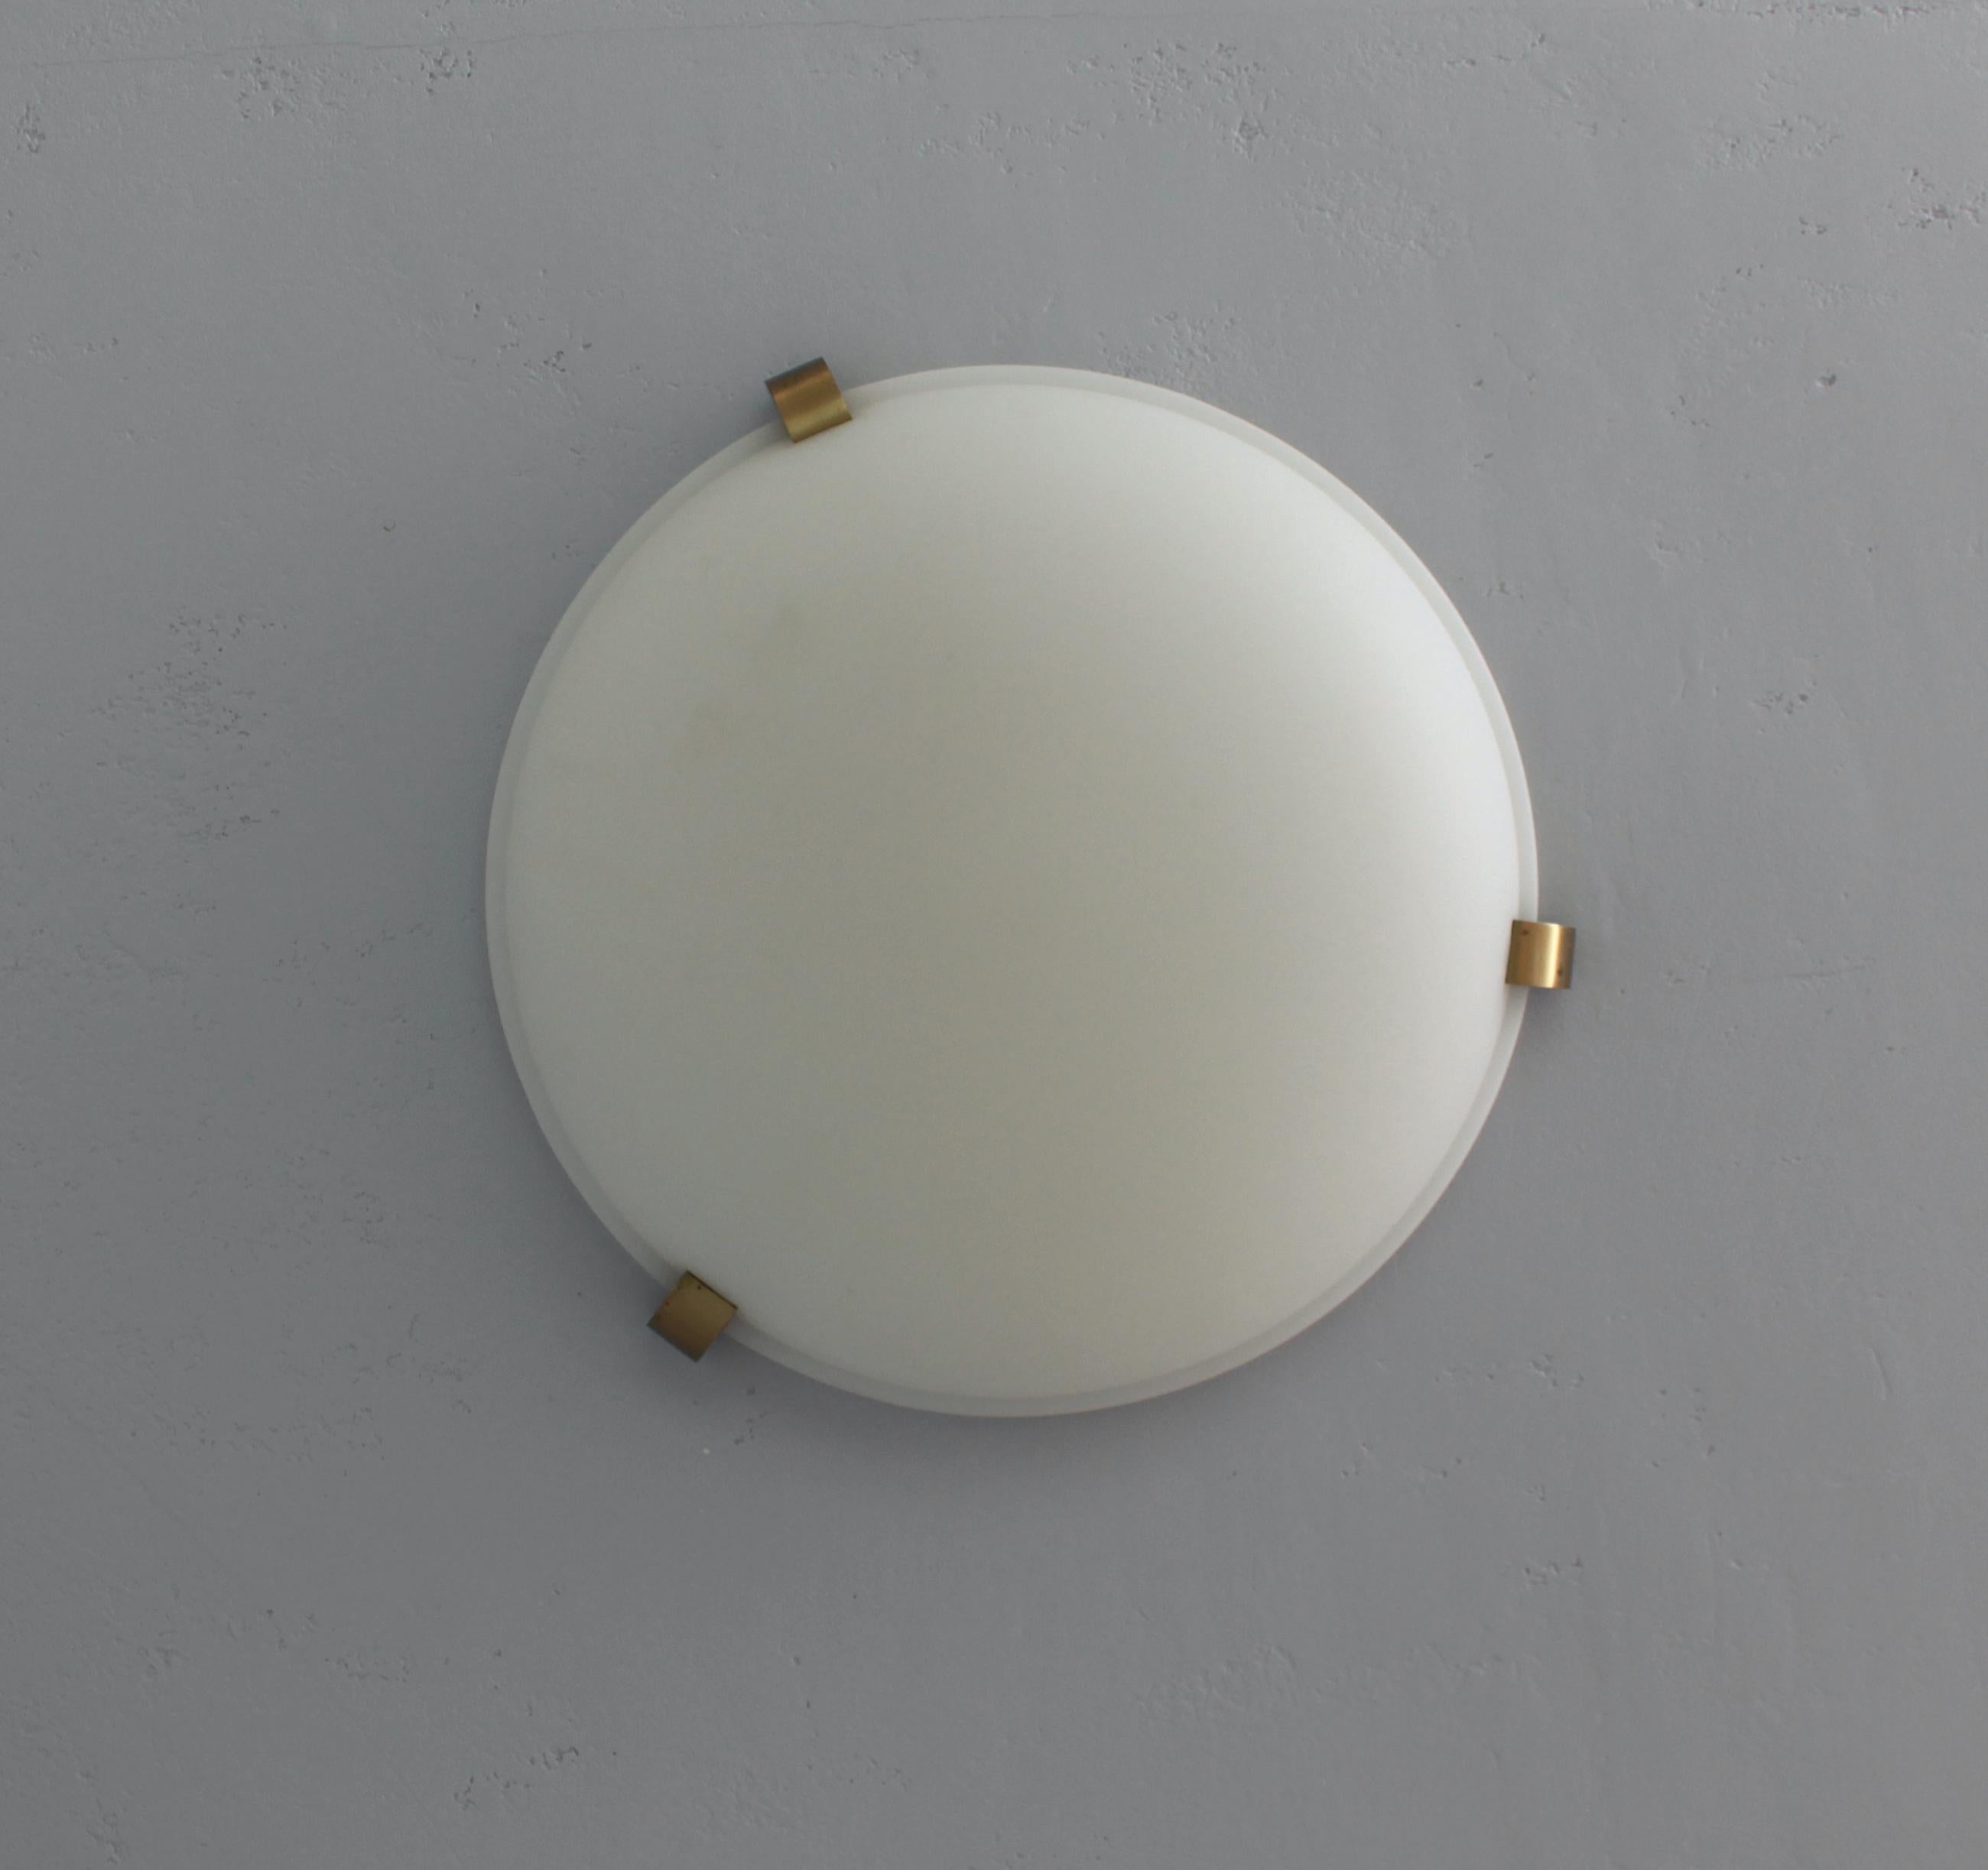 Jean Perzel - A fine French Art Deco flush mount ceiling fixtures or wall light with a round fluted and frosted glass shade supported by three bronze studs.
Signed